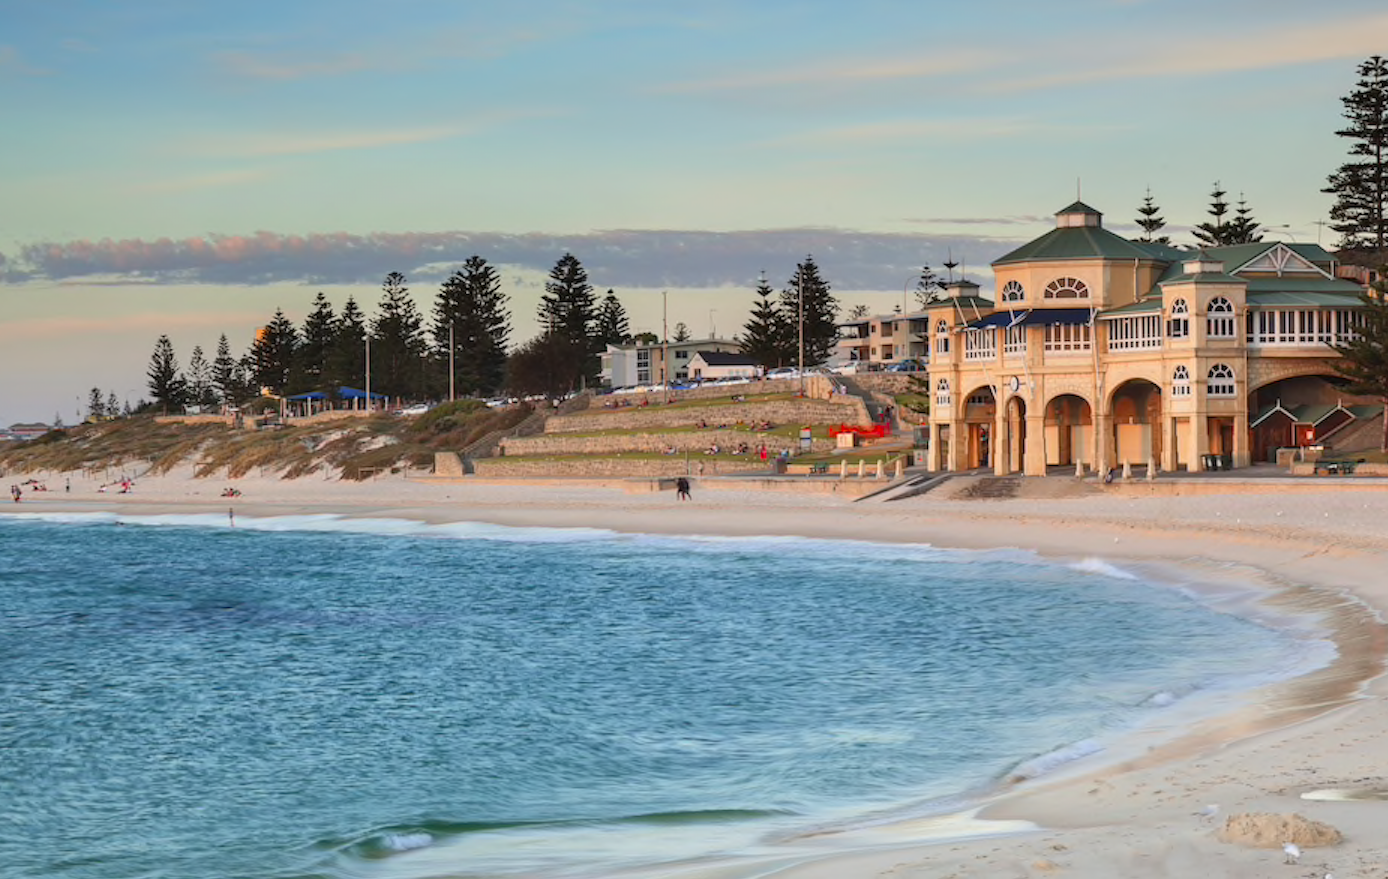 Perth's Cottlesloe Beach Is One Of Perth's Best Beaches With White Sand, Blue Ocean and A Large Old Surf Club.